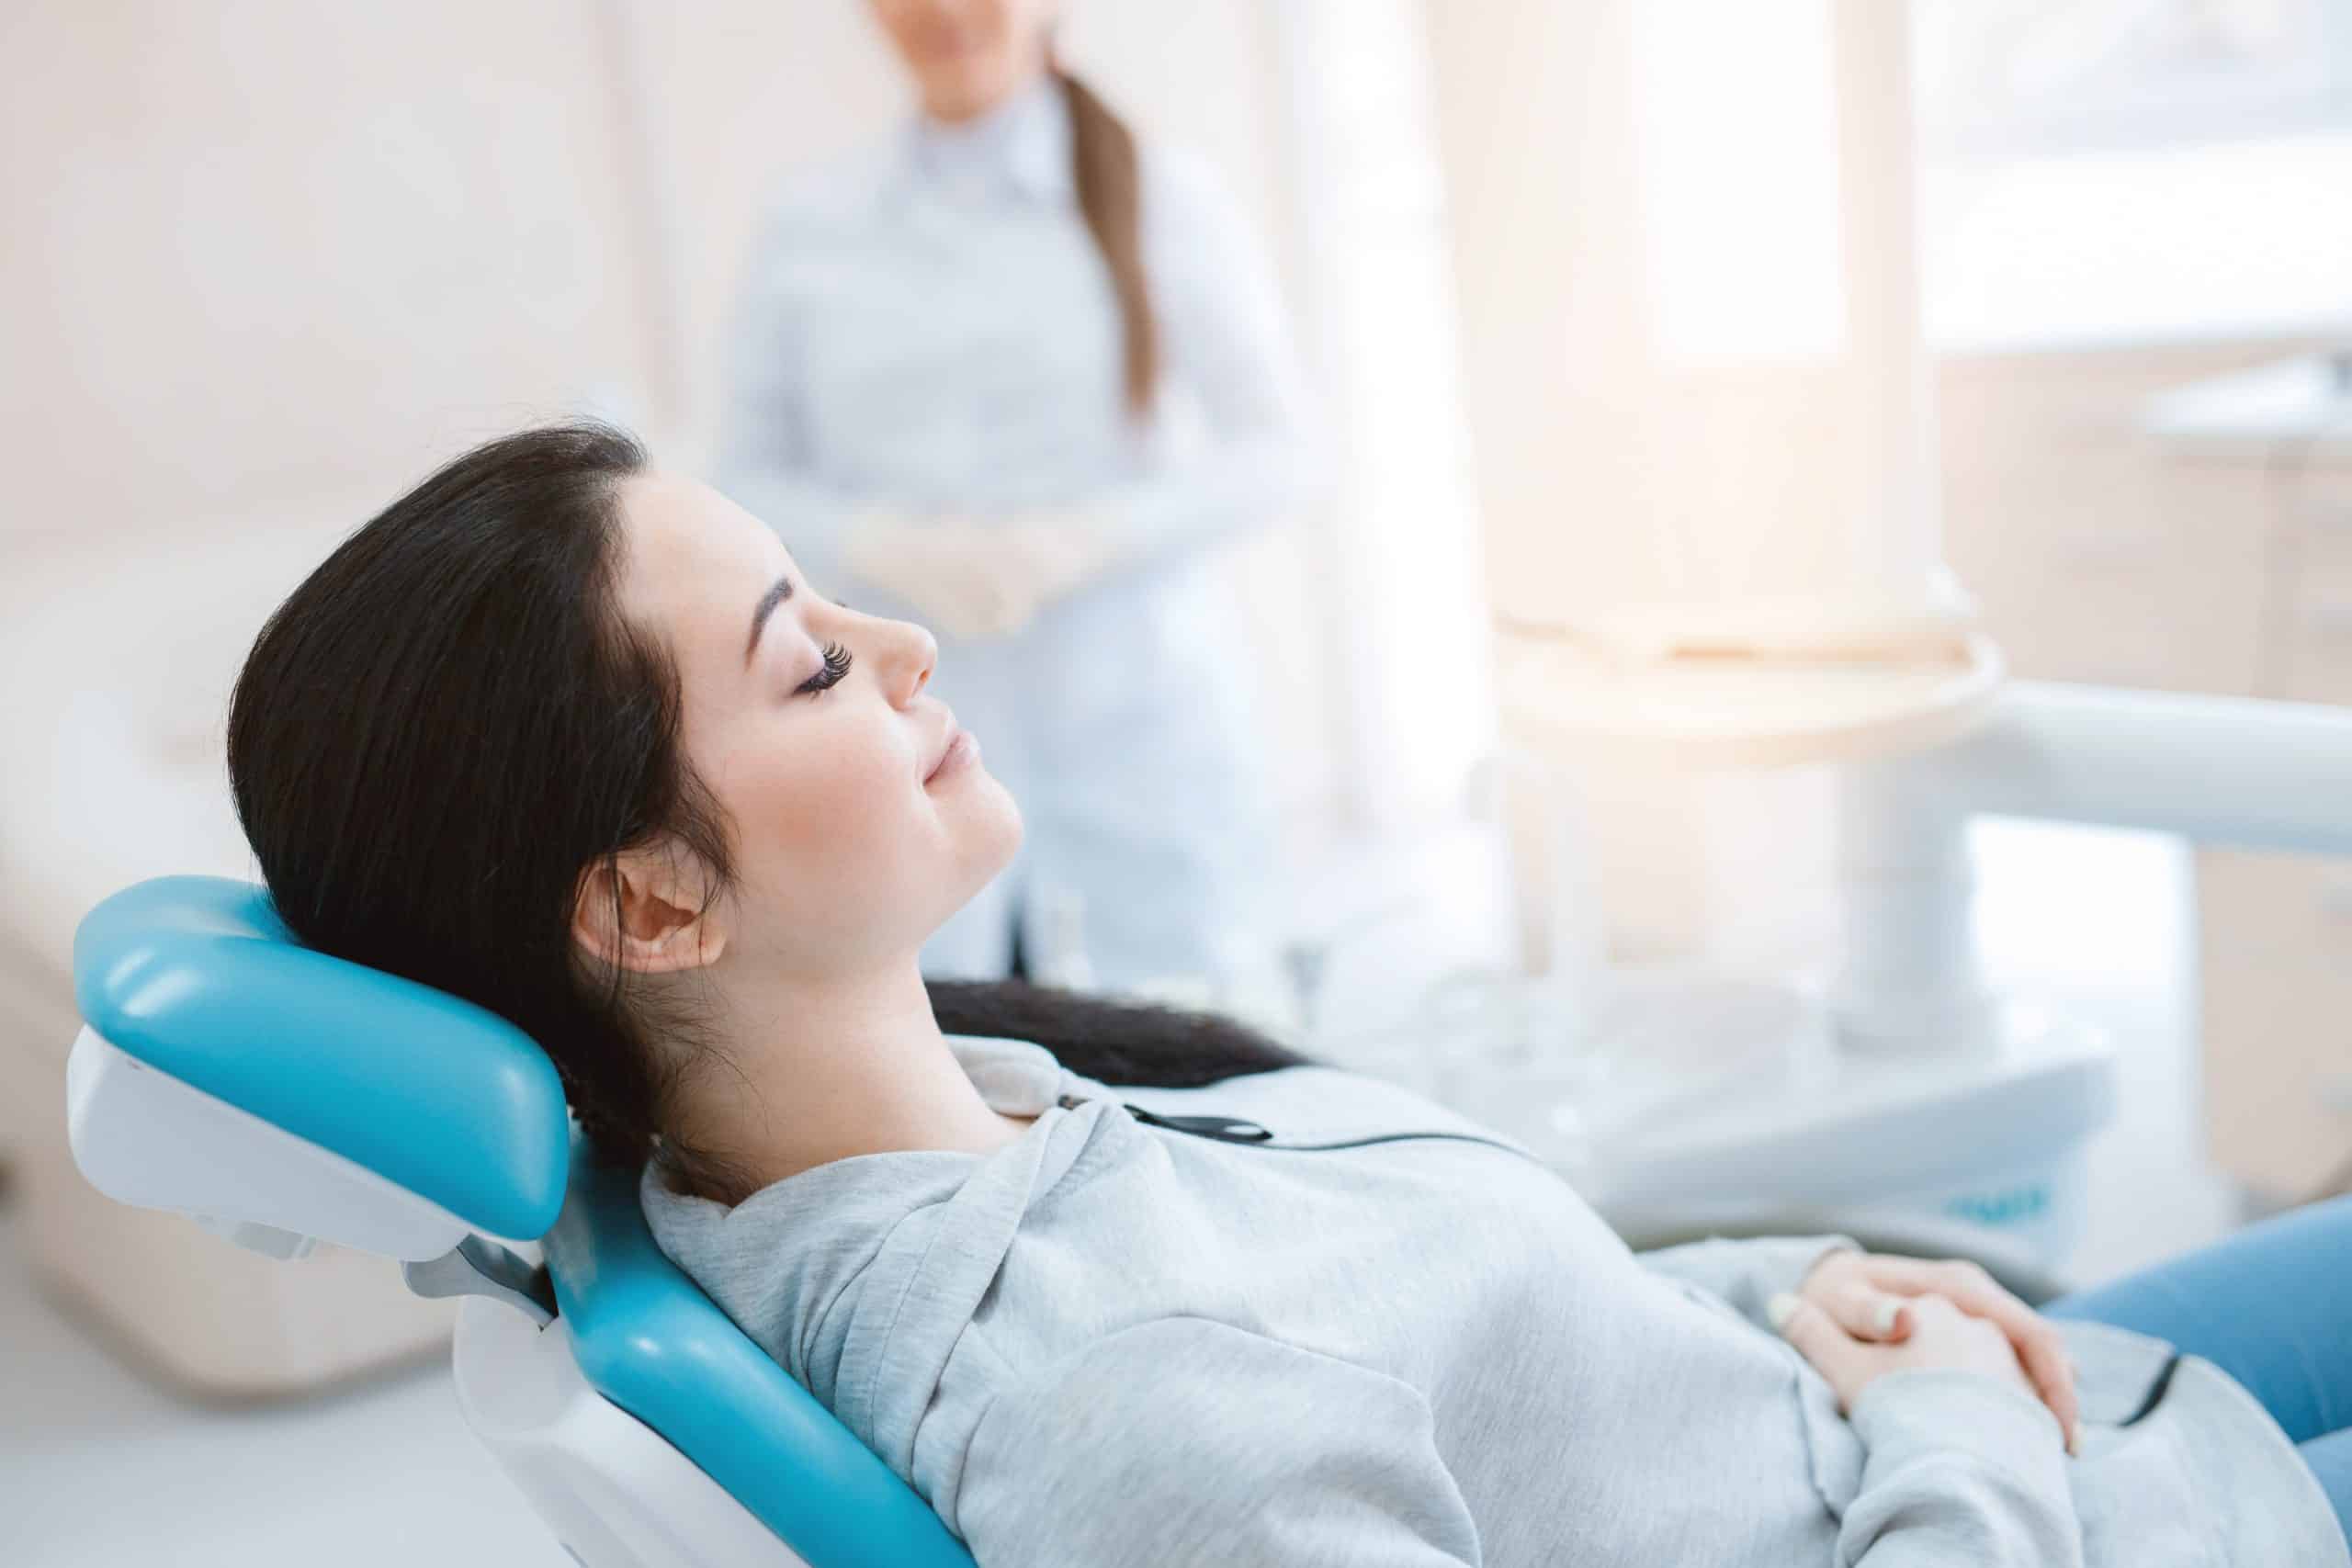 Can multiple dental procedures be done in a single sleep dentistry session?